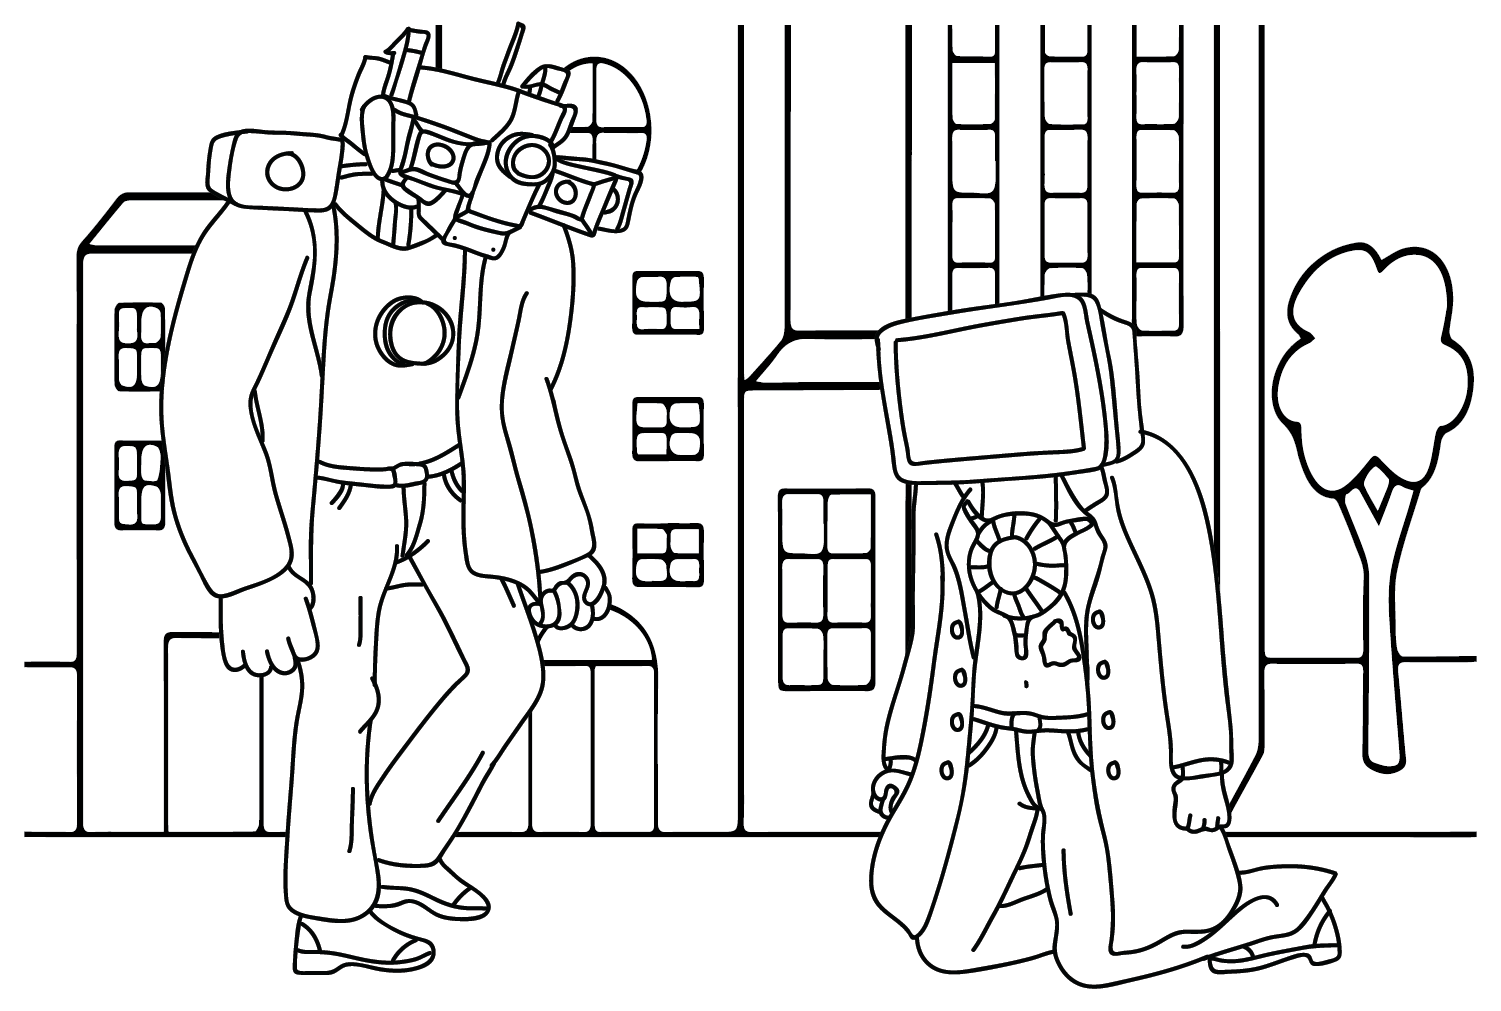 tv-man-and-titan-cameraman-coloring-page-free-printable-coloring-pages